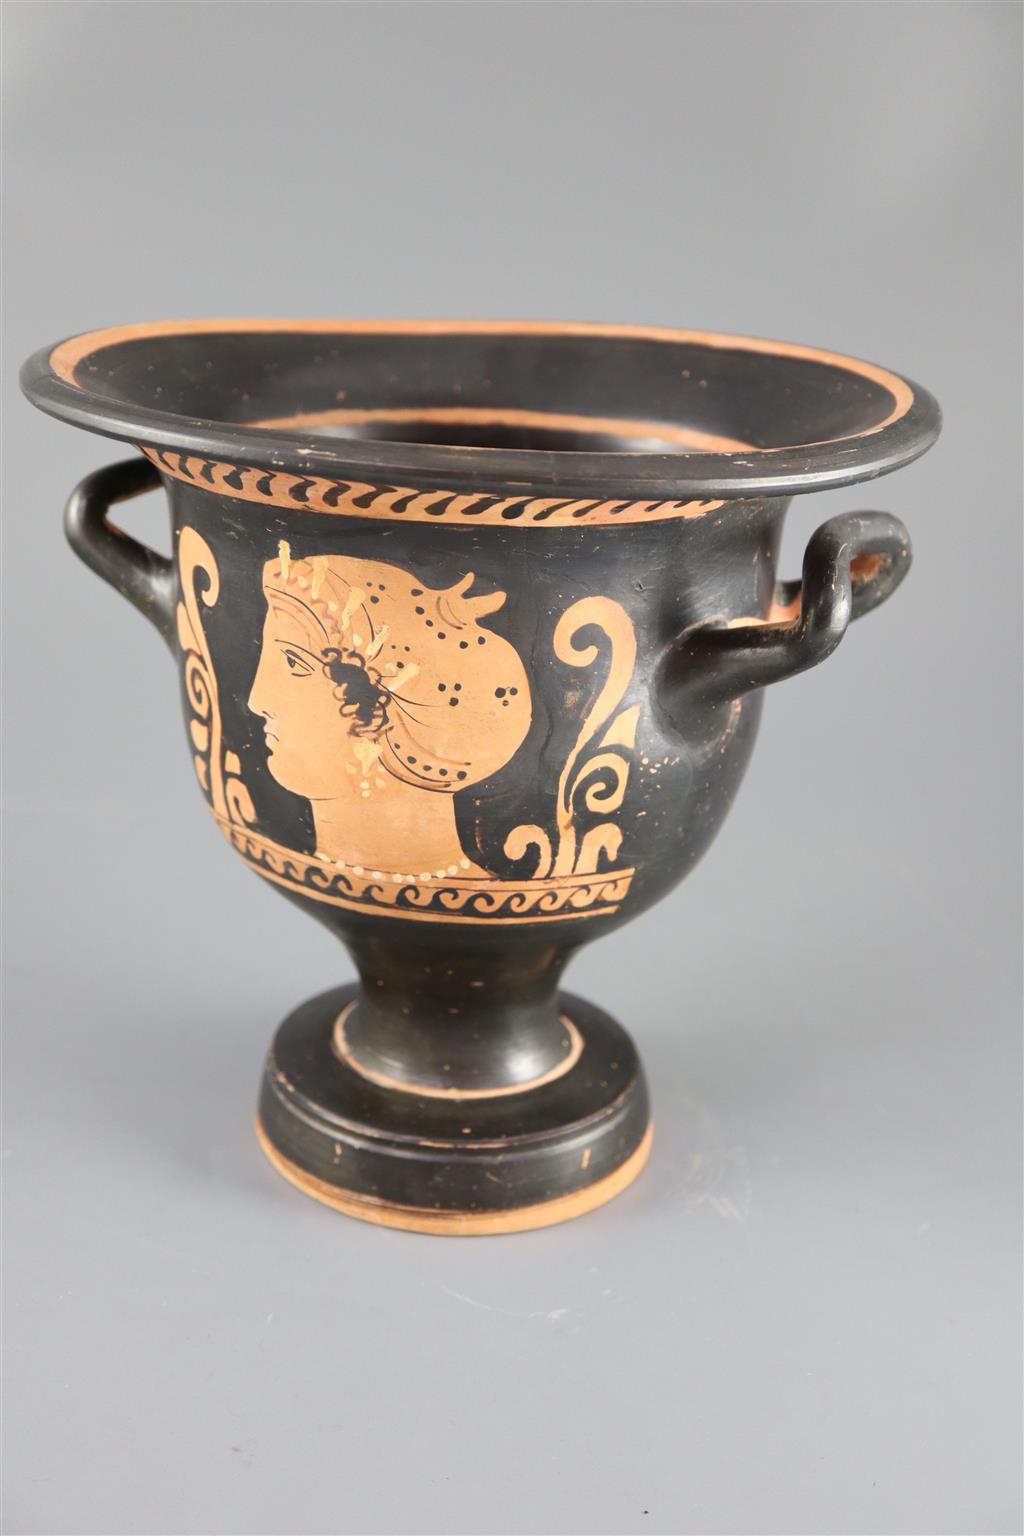 An Apulian red figure bell krater, Southern Italy c. 4th century BC, 21.5cm high, 22.5cm diameter